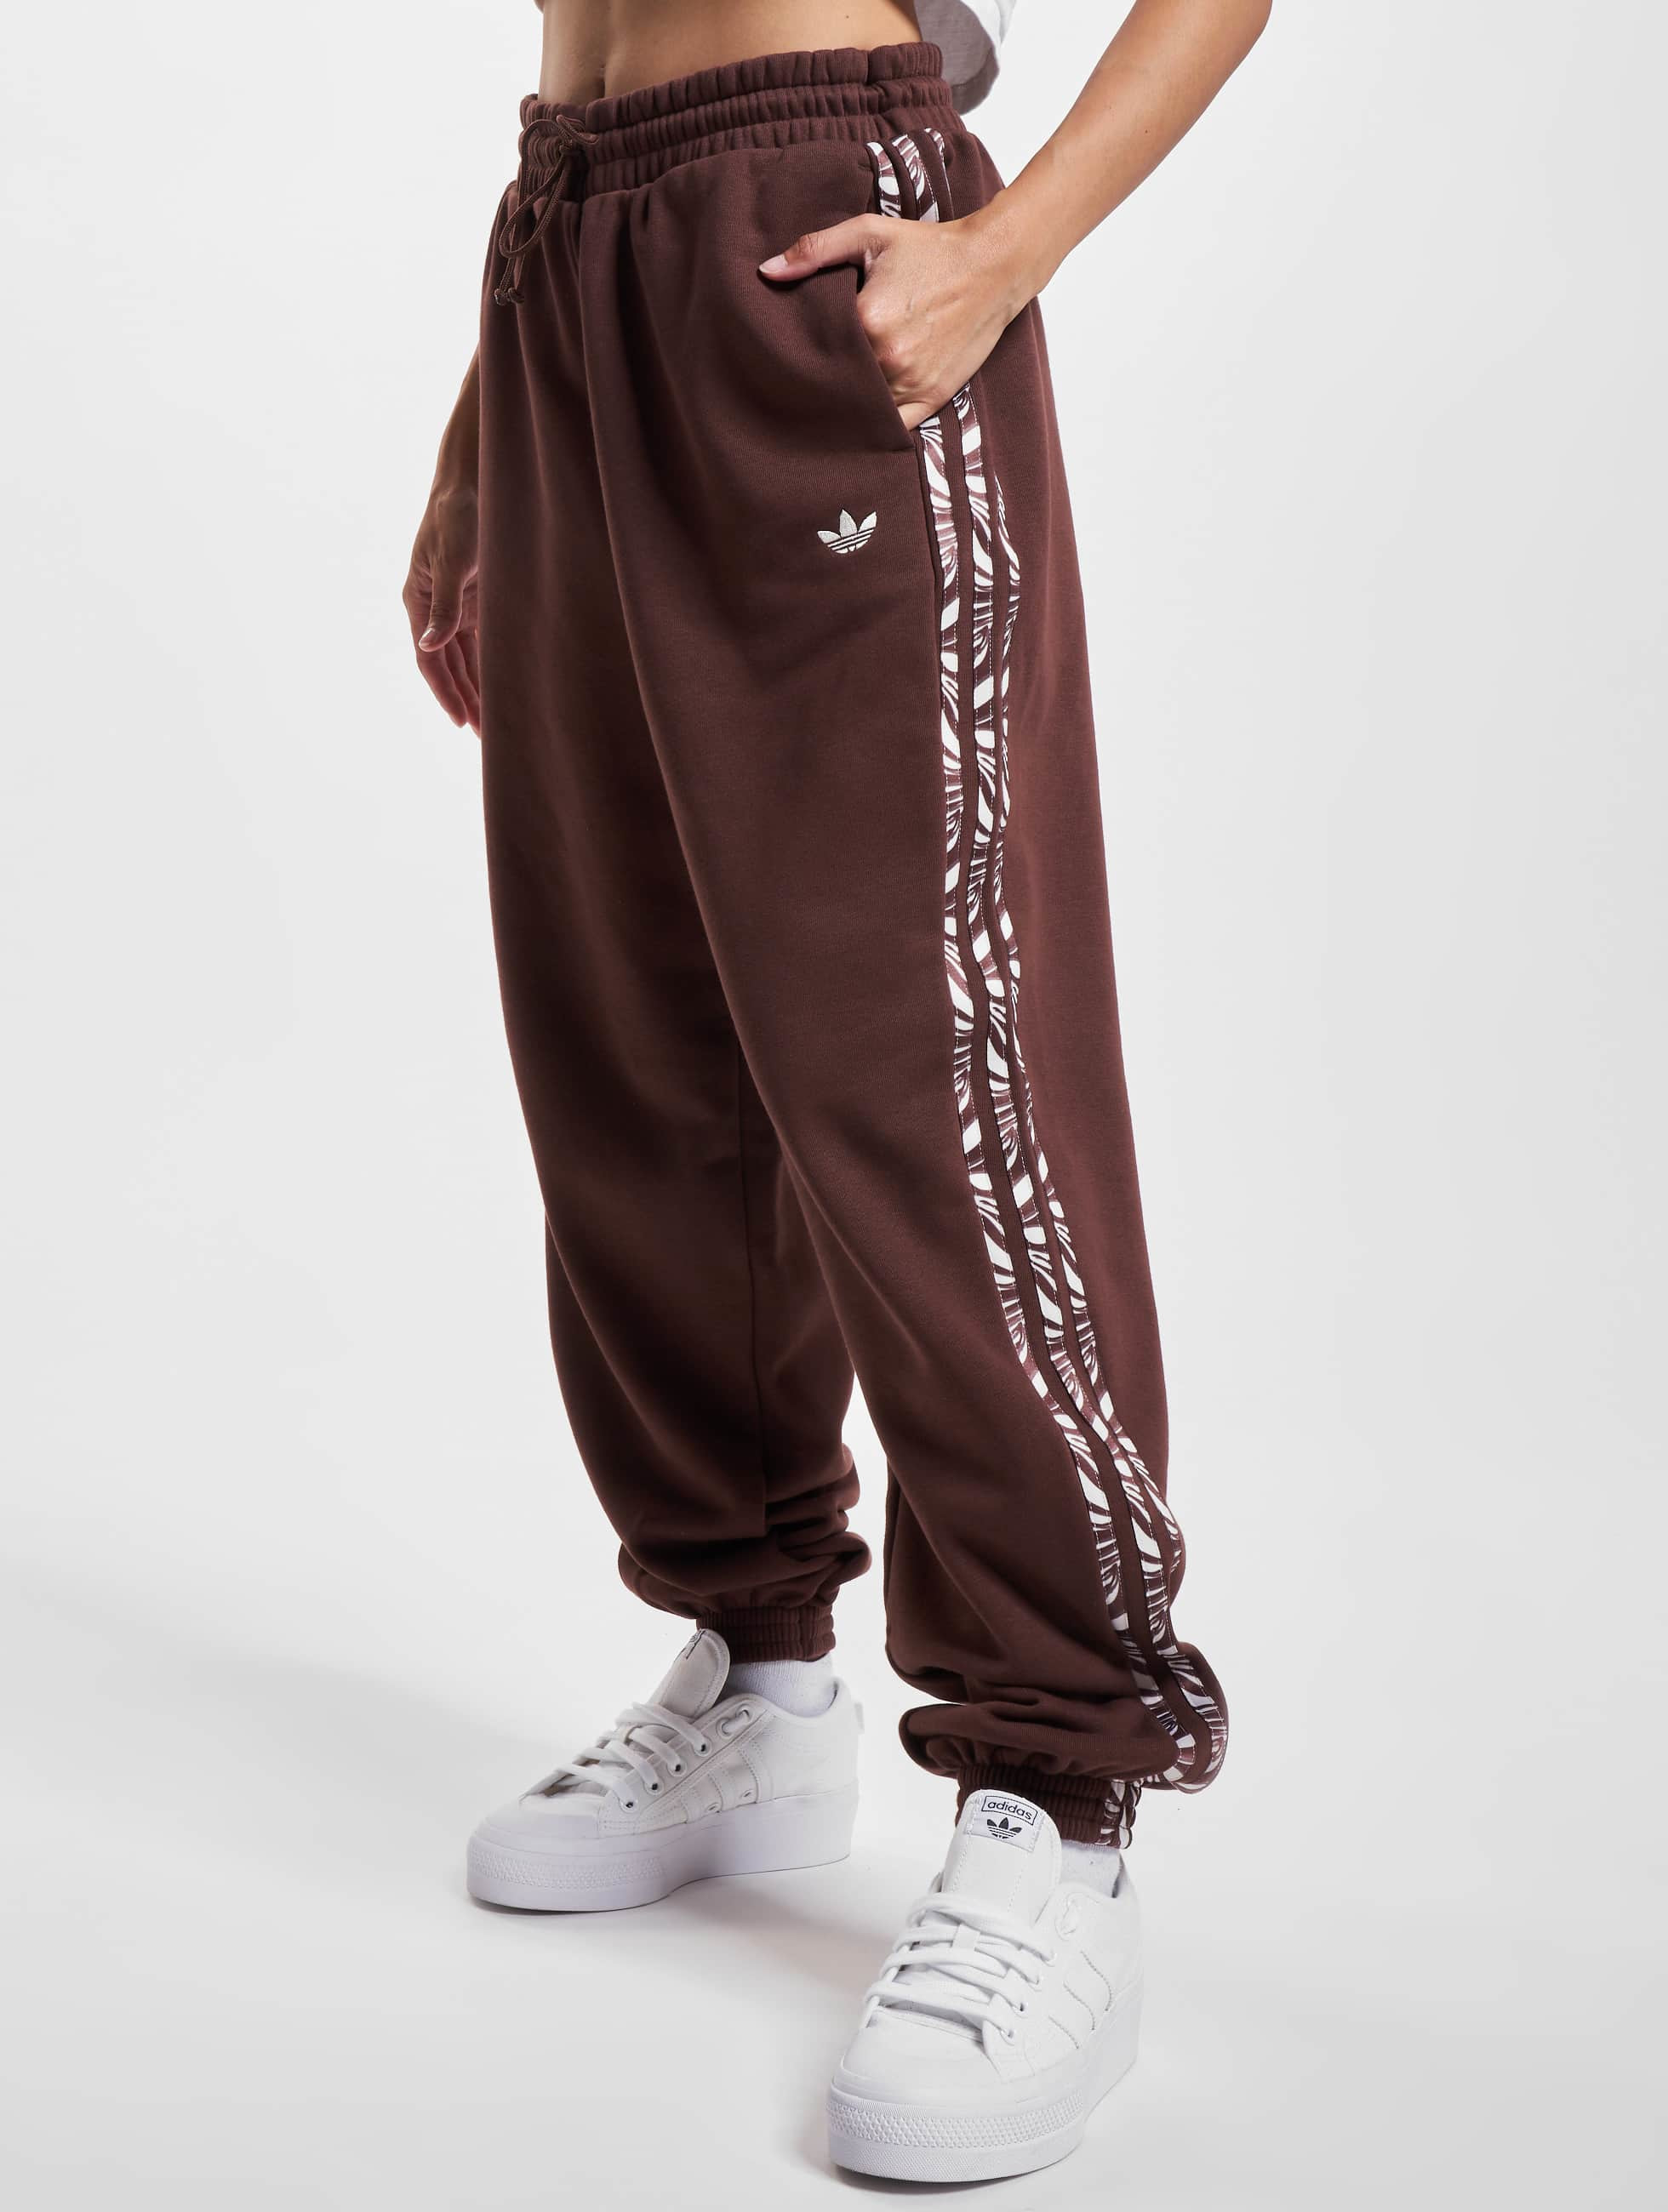 Must Mortal onion brown adidas sweatpants victory Perpetual Explicitly